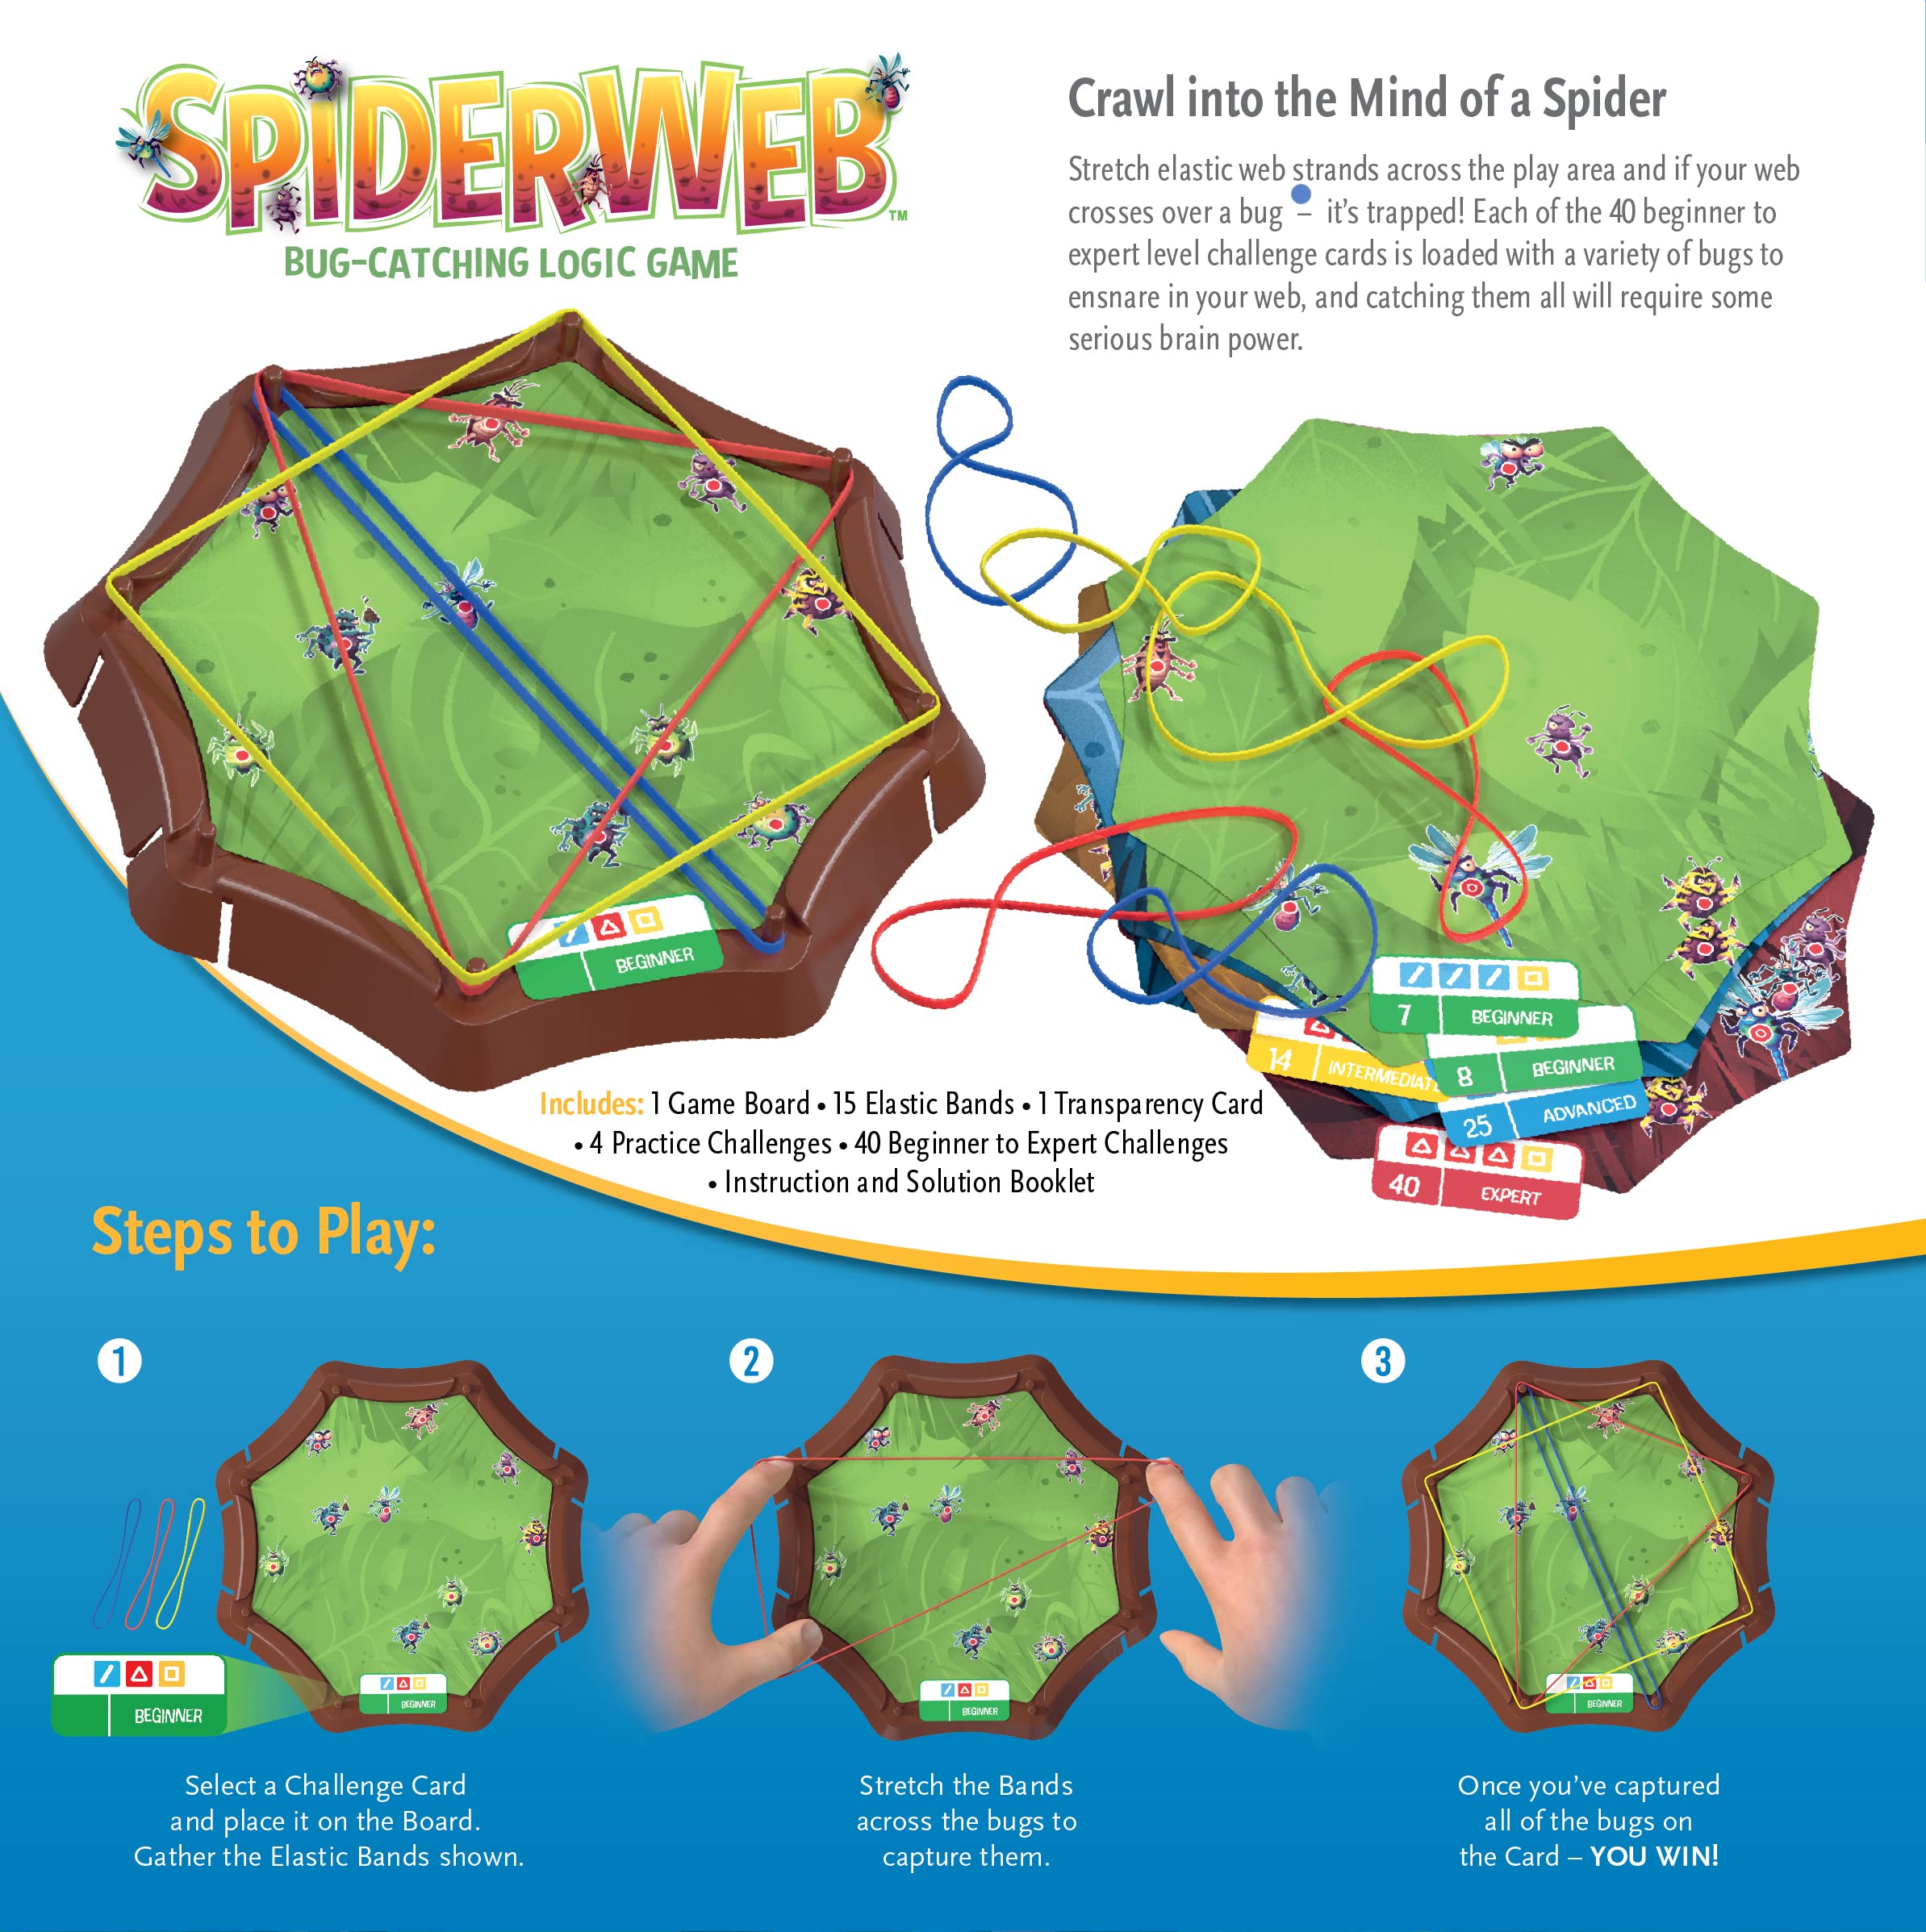 Spiderweb: A Bug-Catching Logic Game for Ages 8+